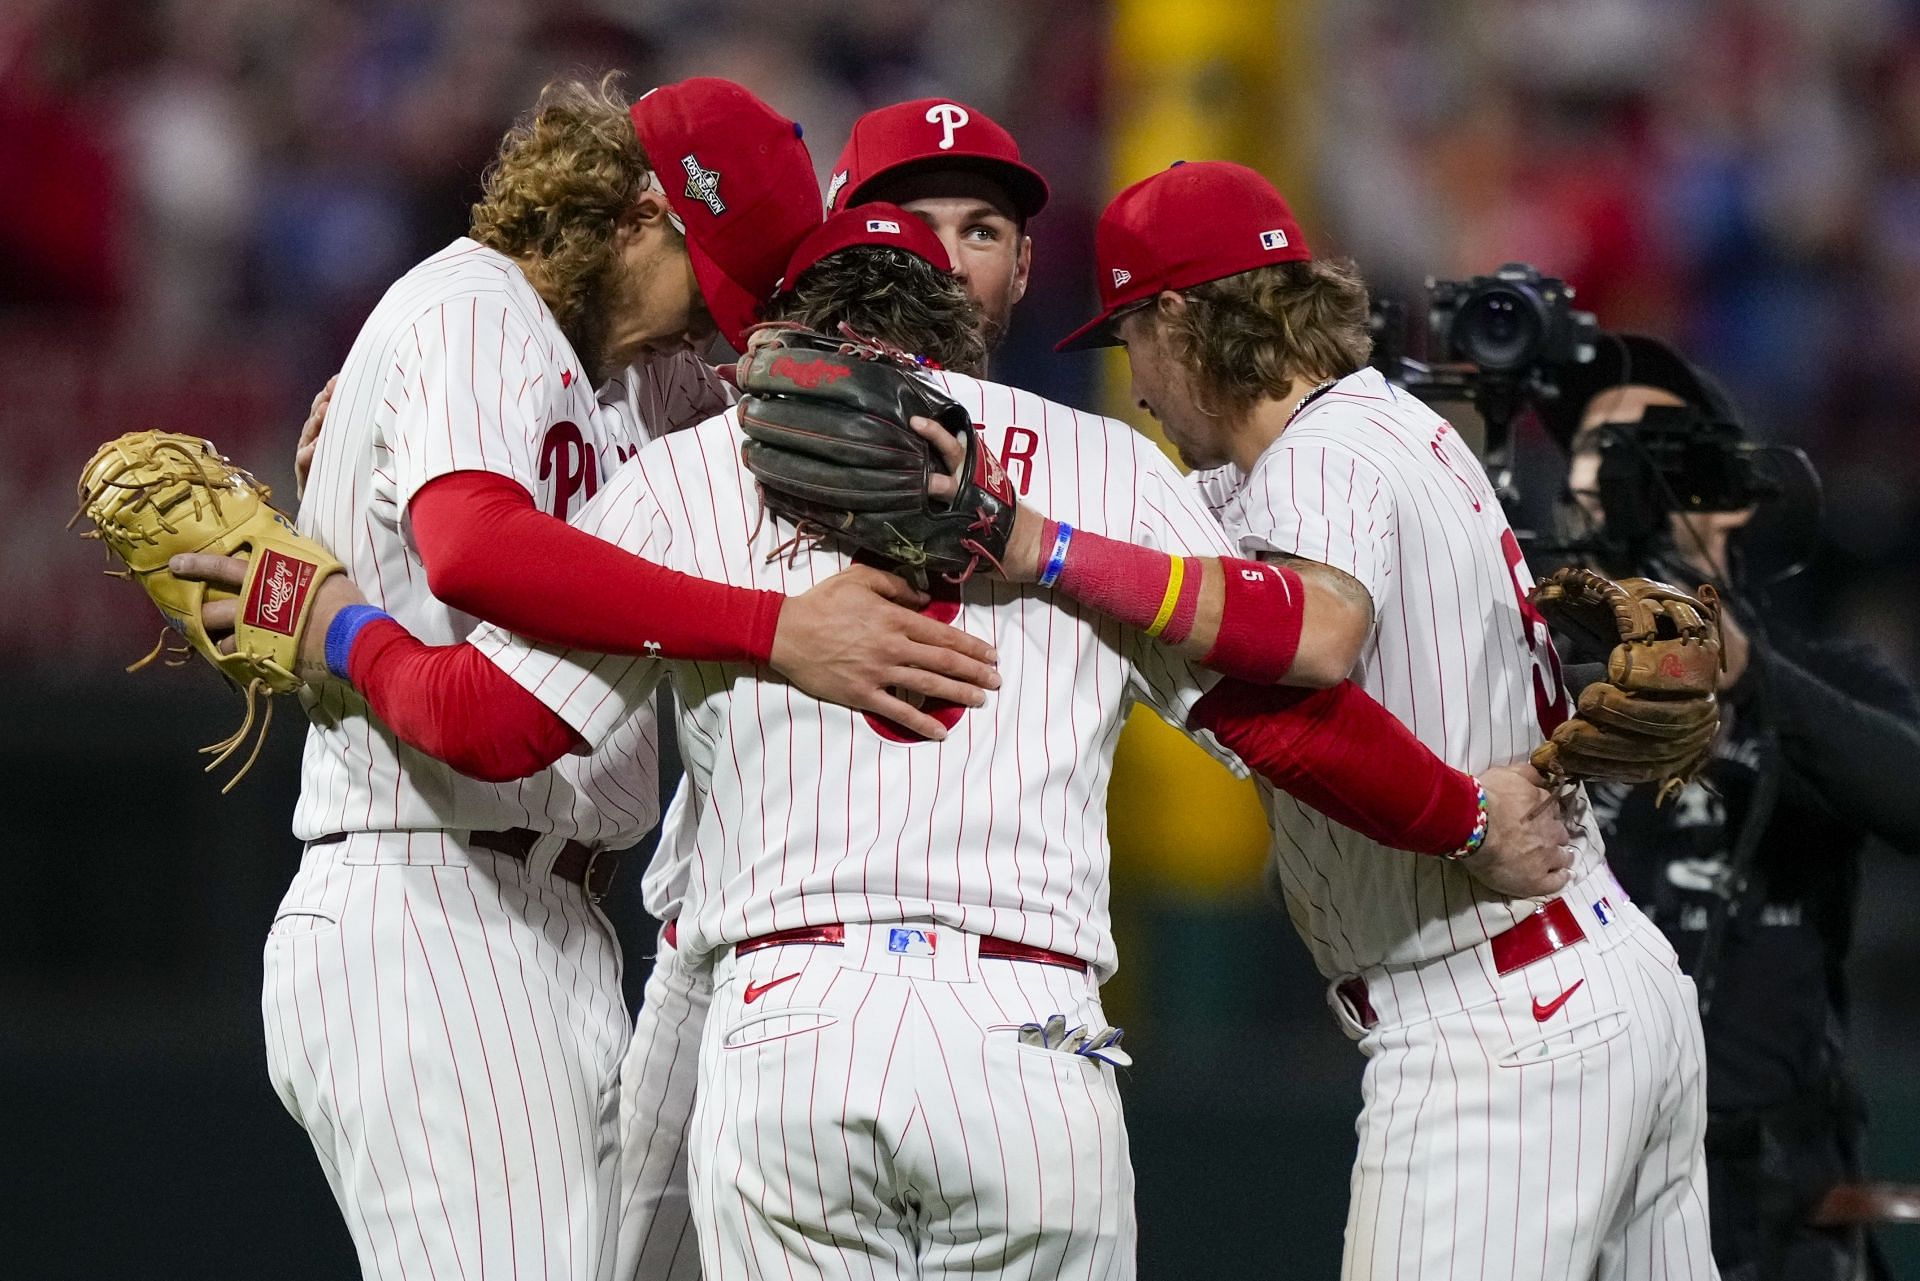 The Phillies showcased their prowess as the best homerun-hitting team in baseball.